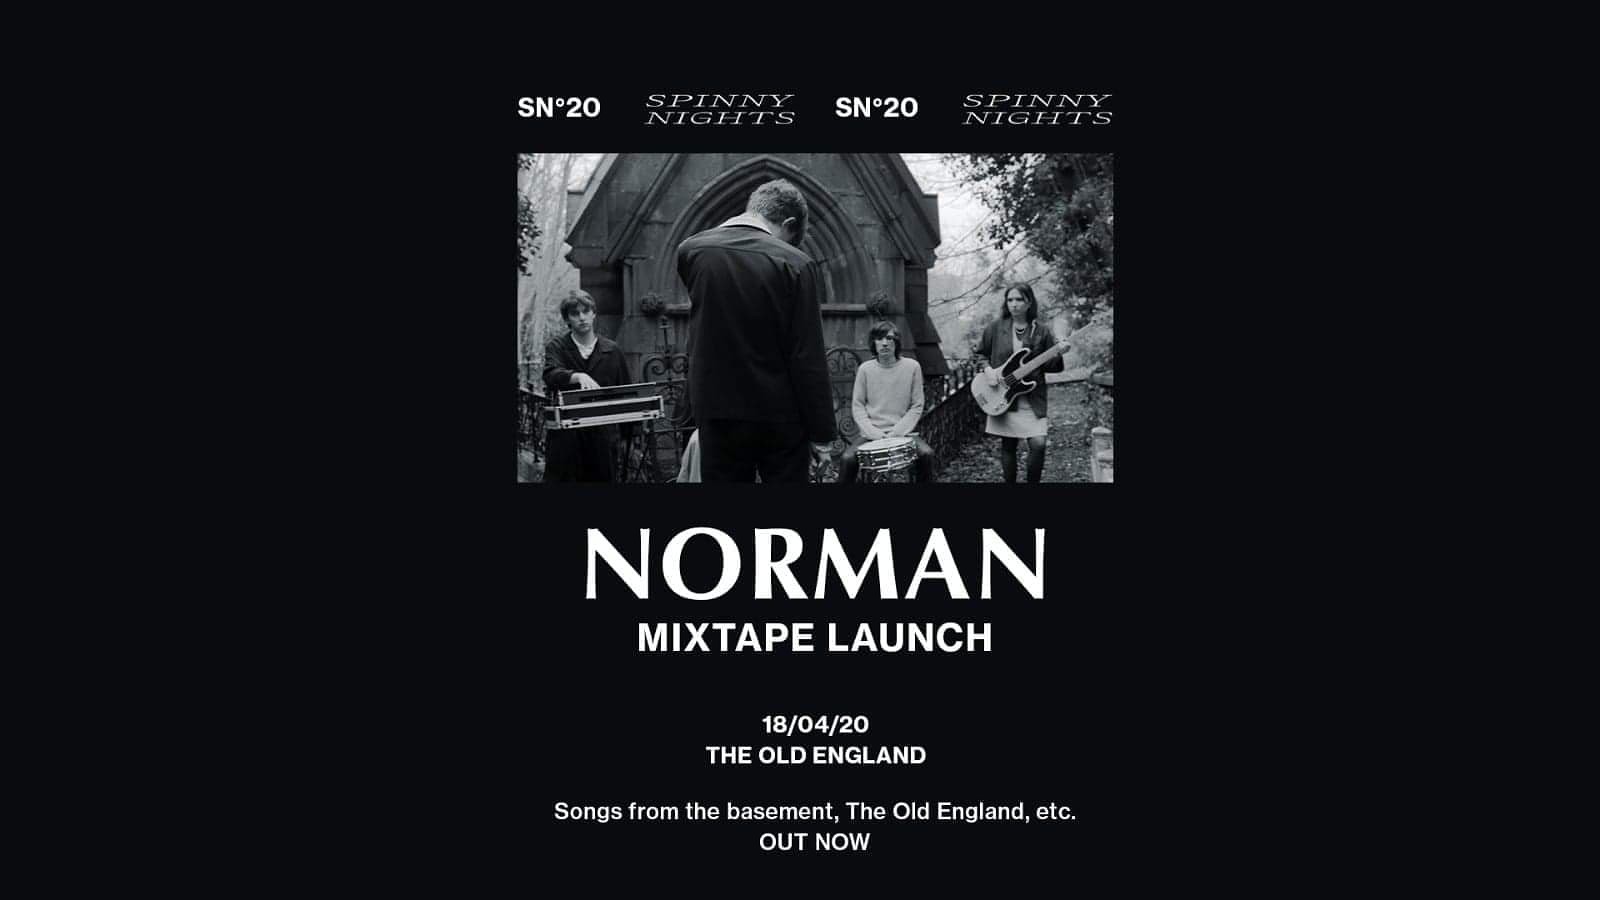 Norman Mixtape Launch at The Old England Pub